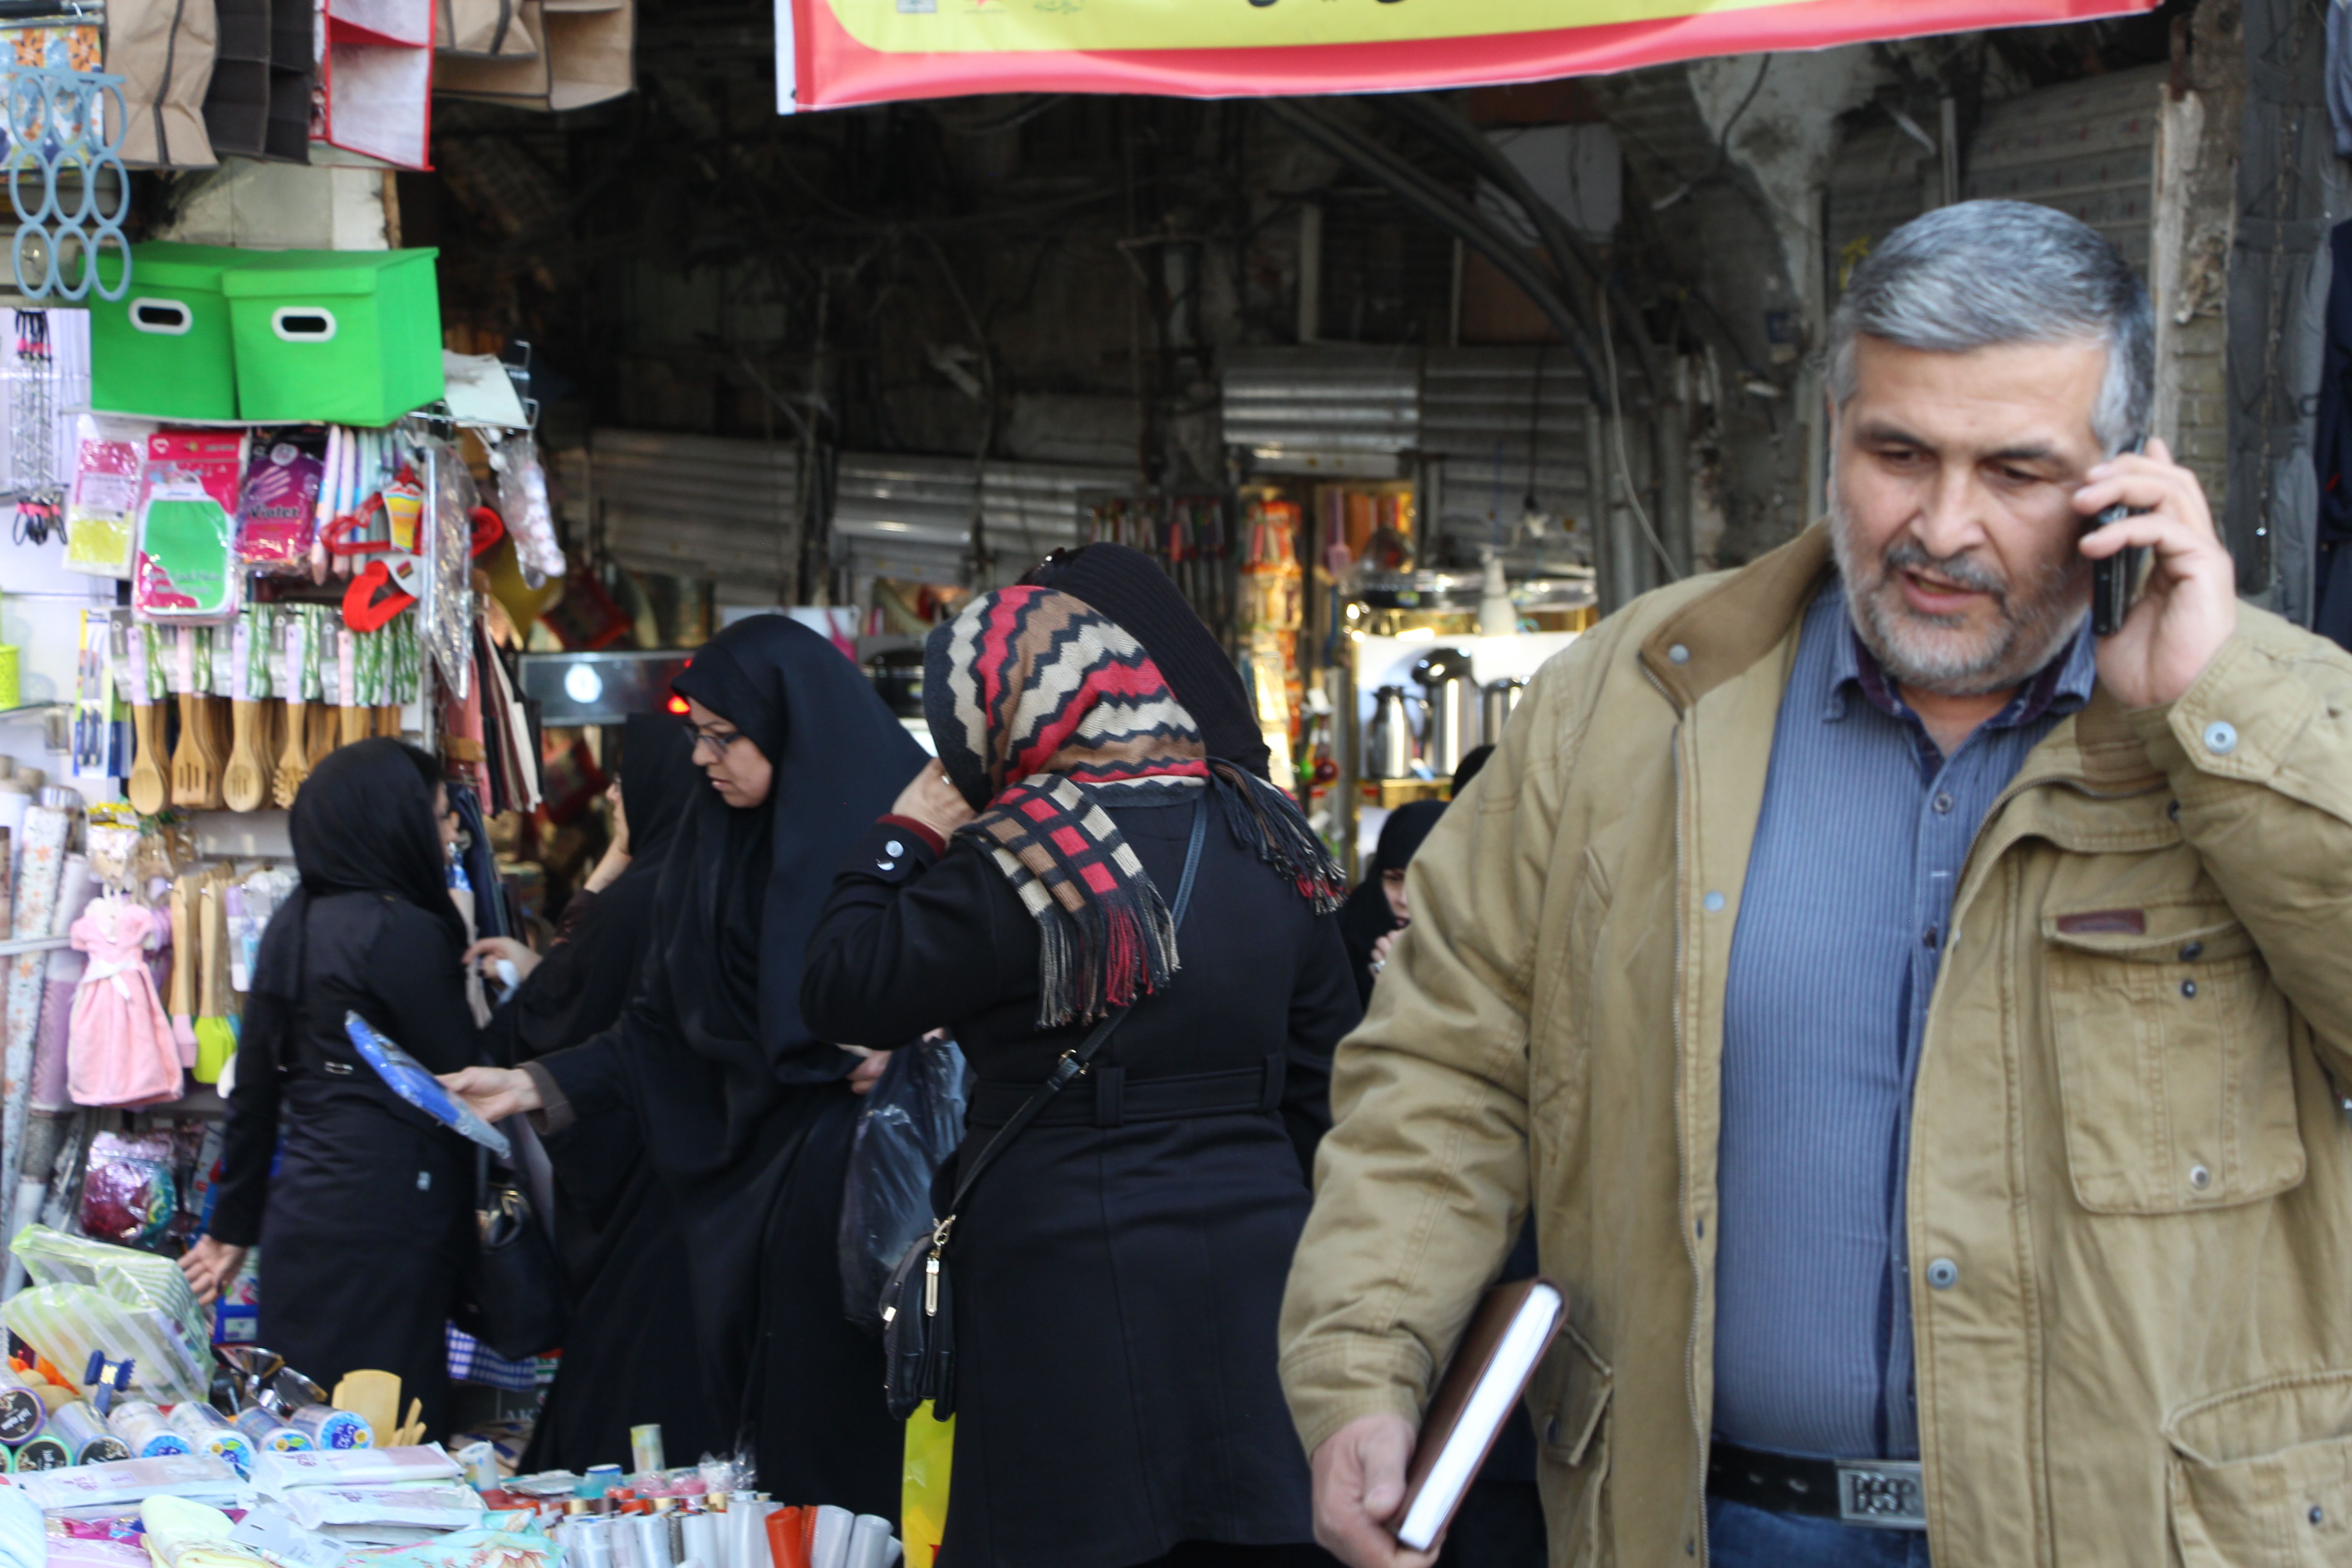 In random interviews in Tehran's bazaar, Iranians complained about government economic policies but also expressed strong opposition to Trump's interference. Image by Reese Erlich. Iran, 2018.